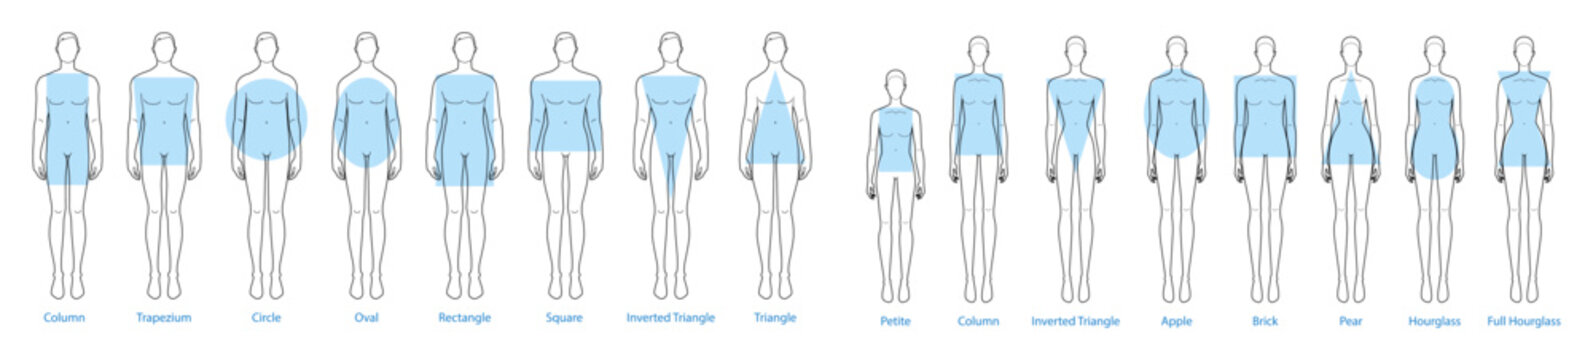 Set of Women Men body shapes types silhouettes: apple, pear, rectangle, column, trapezium, circle, oval, square, brick, hourglass, round, inverted triangle, petite. Male and Female Vector illustration